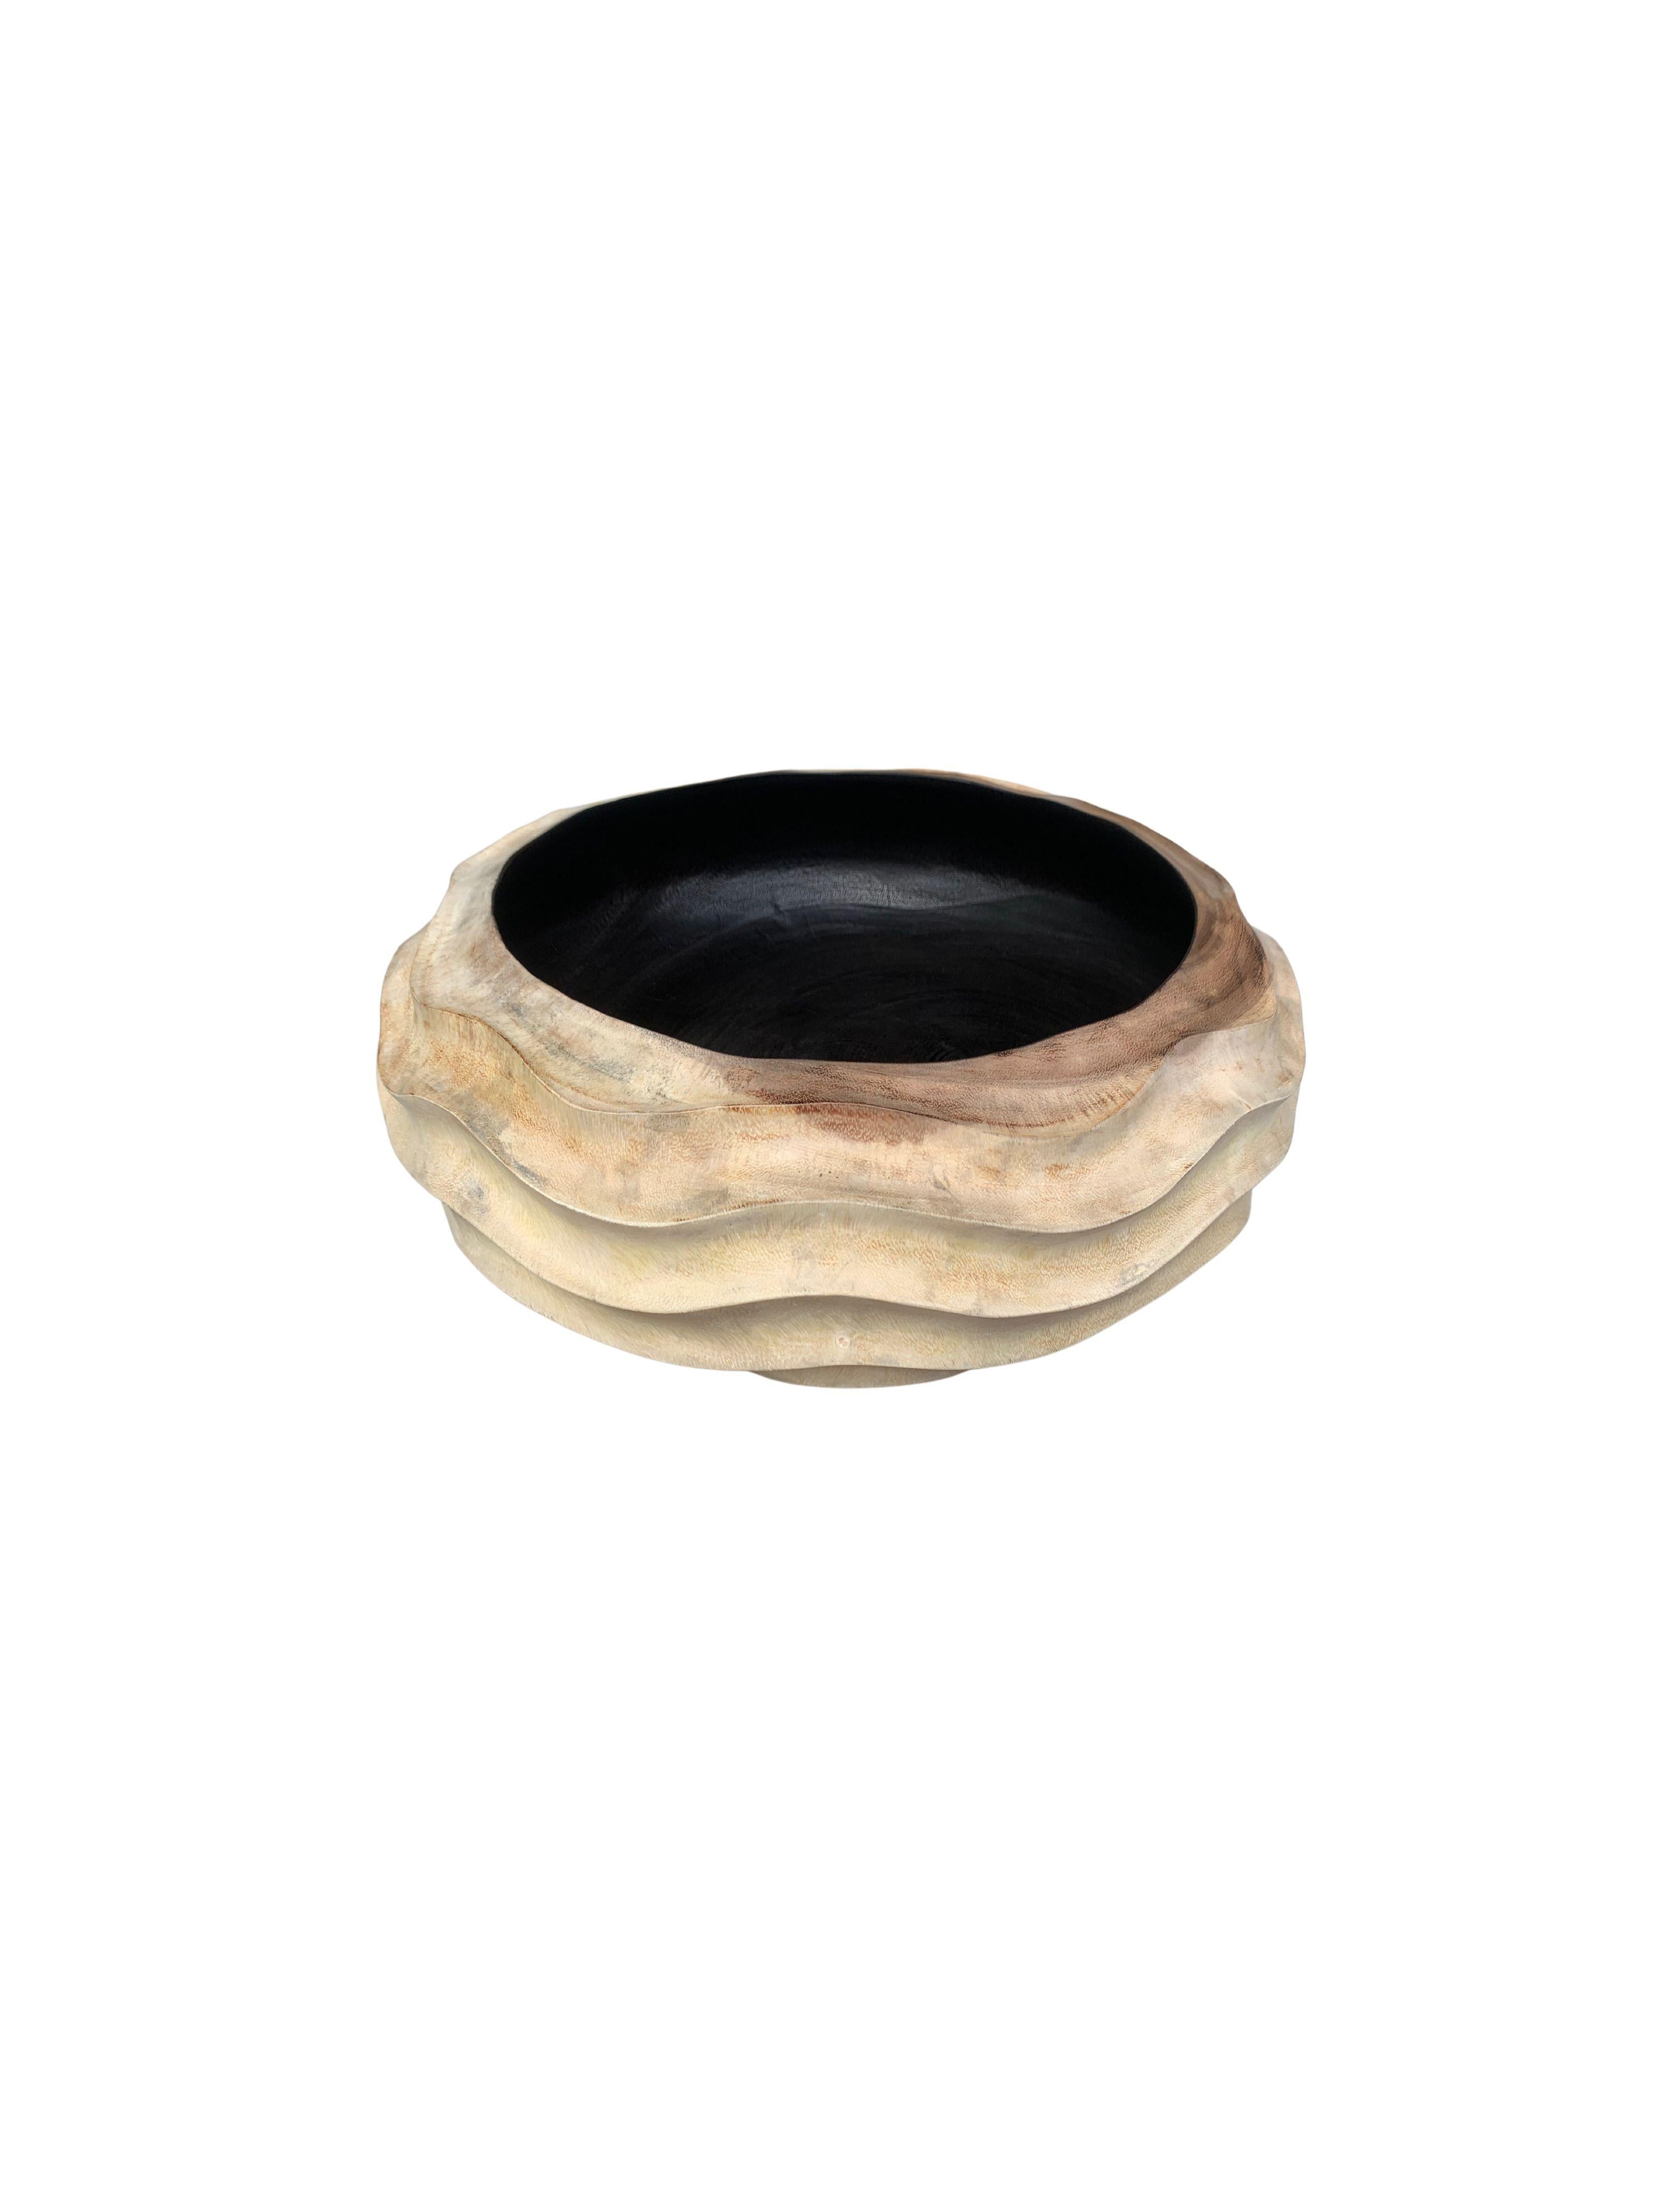 A hand-crafted mango wood bowl. The bowl was cut from a much larger slab of mango wood and features a curved and ribbed texture on its sides. The bowl is contrasted by an exterior that features a natural finish and a basin that features a burnt